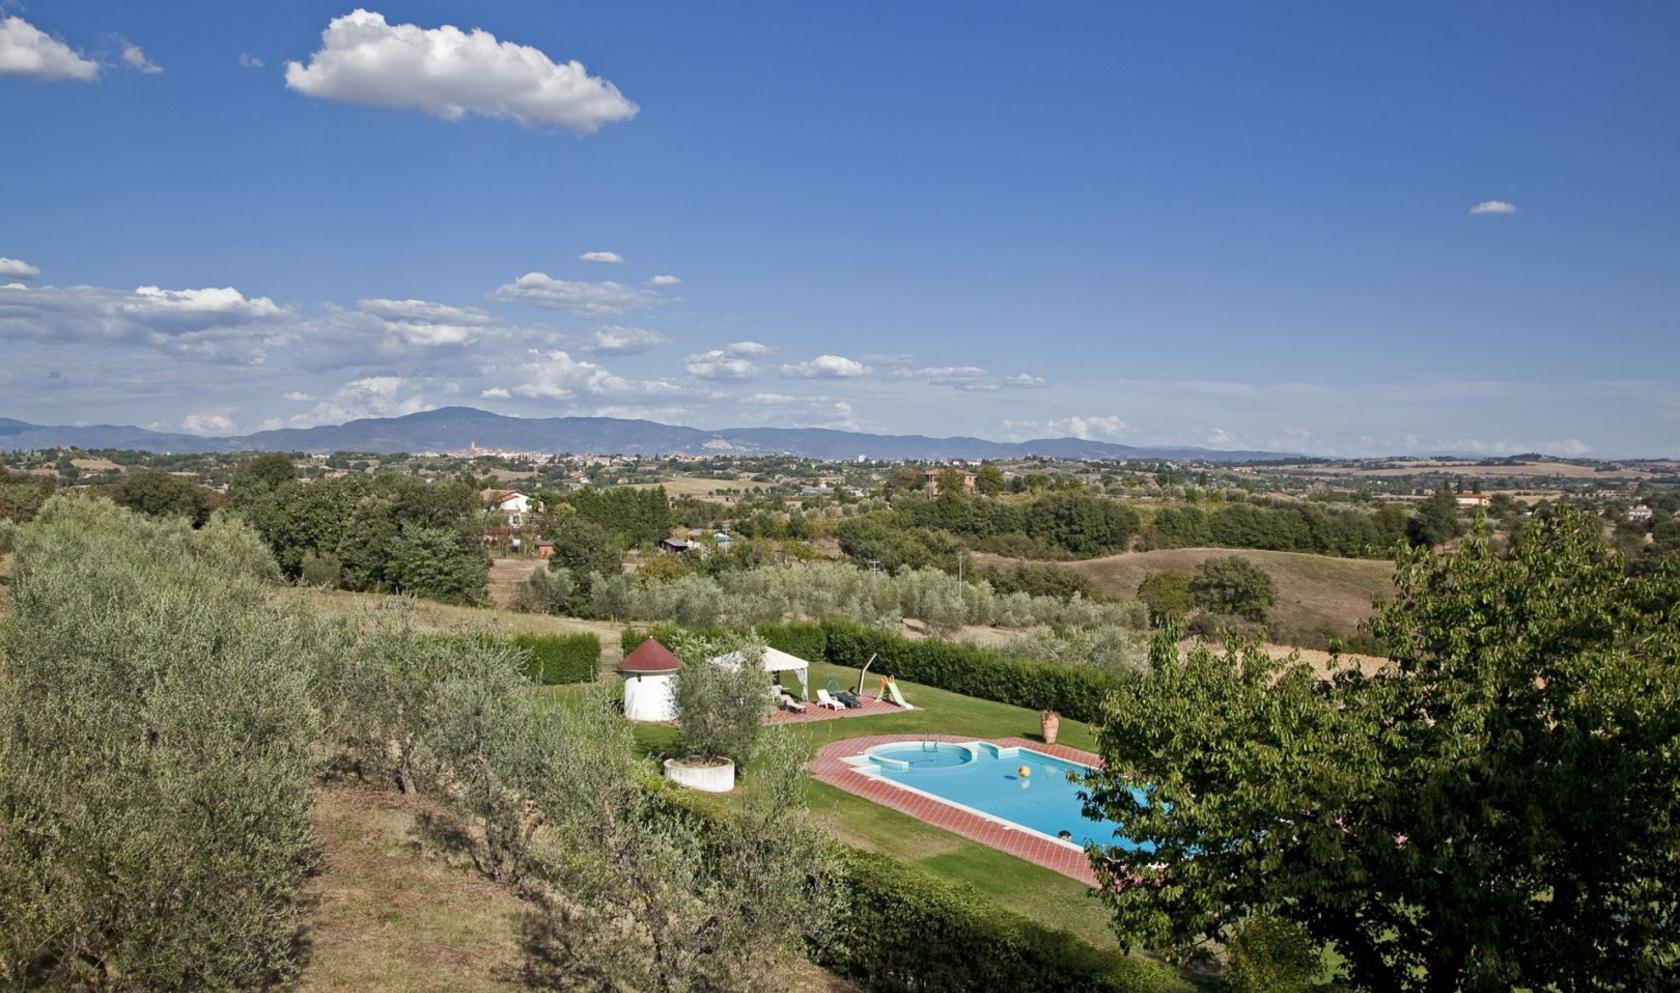 Toscana Immobiliare - Luxury villa for sale in Tuscany between Arezzo and Siena.